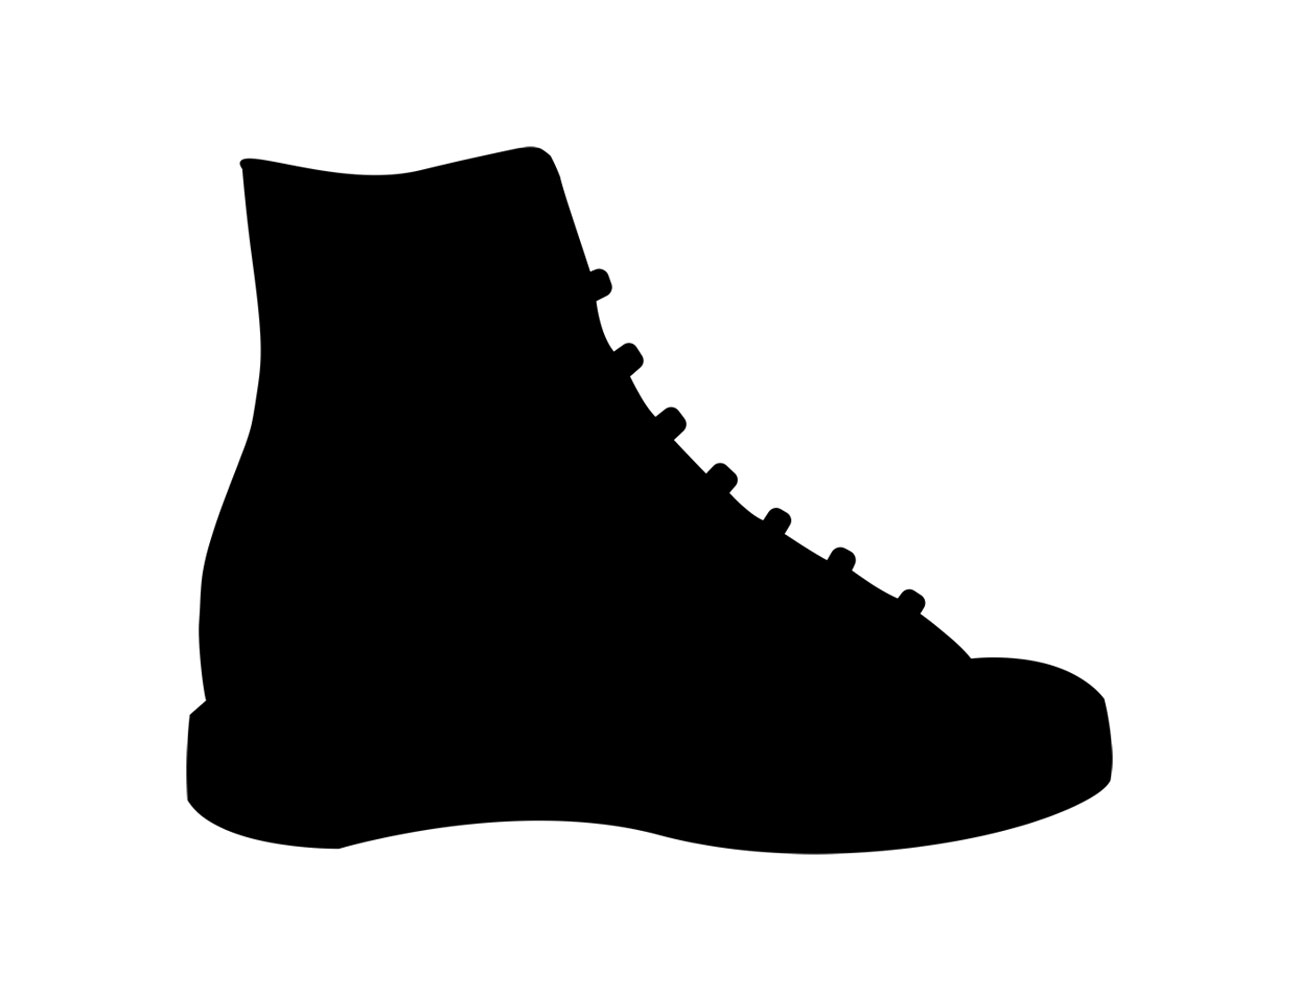 Shoe drawing one: black silhouette.